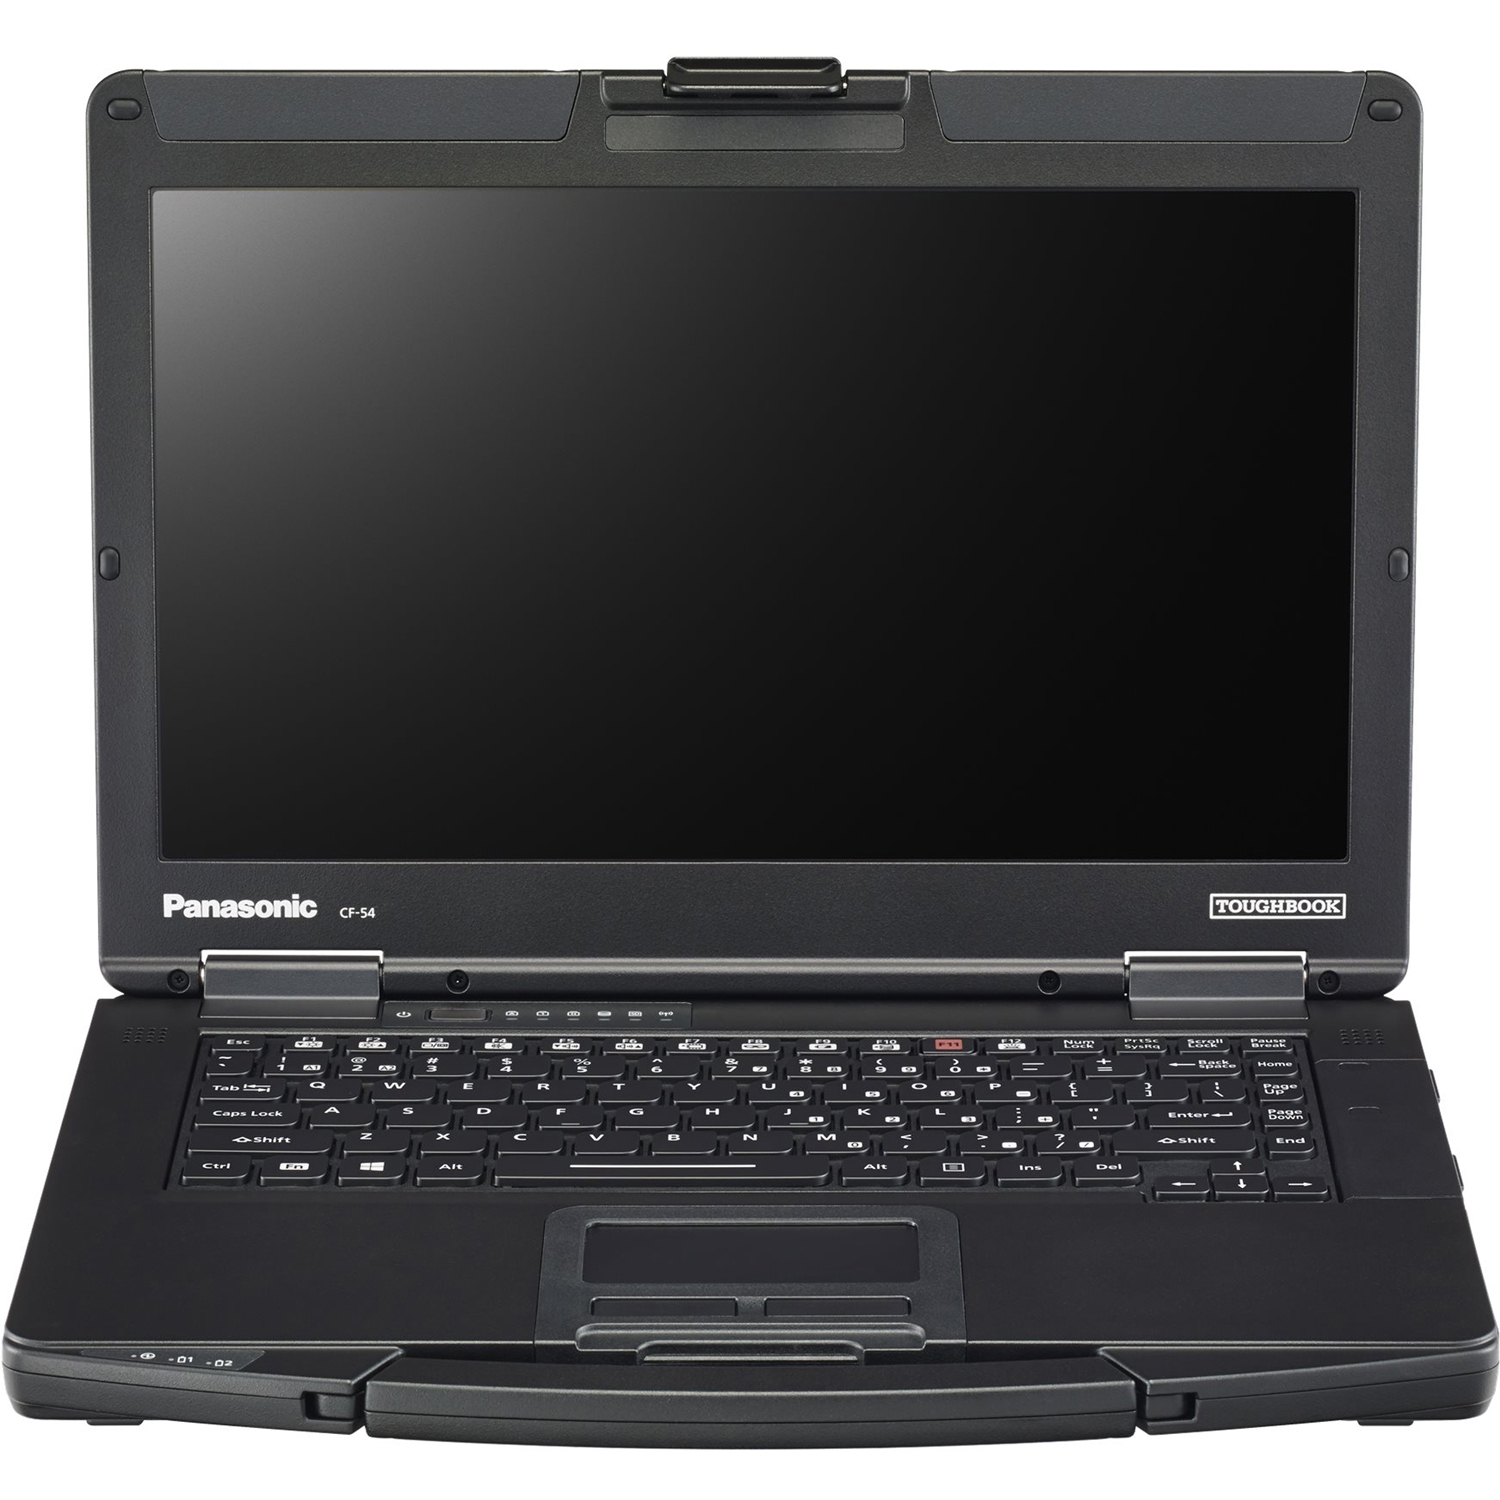 Panasonic Toughbook 54 Prime - Intel Core i5 - 7300U / up to 3.5 GHz - vPro - Win 10 Pro - HD Graphics 620 - 8 GB RAM - 256 GB SSD - DVD SuperMulti - 14" 1366 x 768 (HD) - Wi-Fi 5 - 4G LTE - with Toughbook Preferred - image 3 of 6